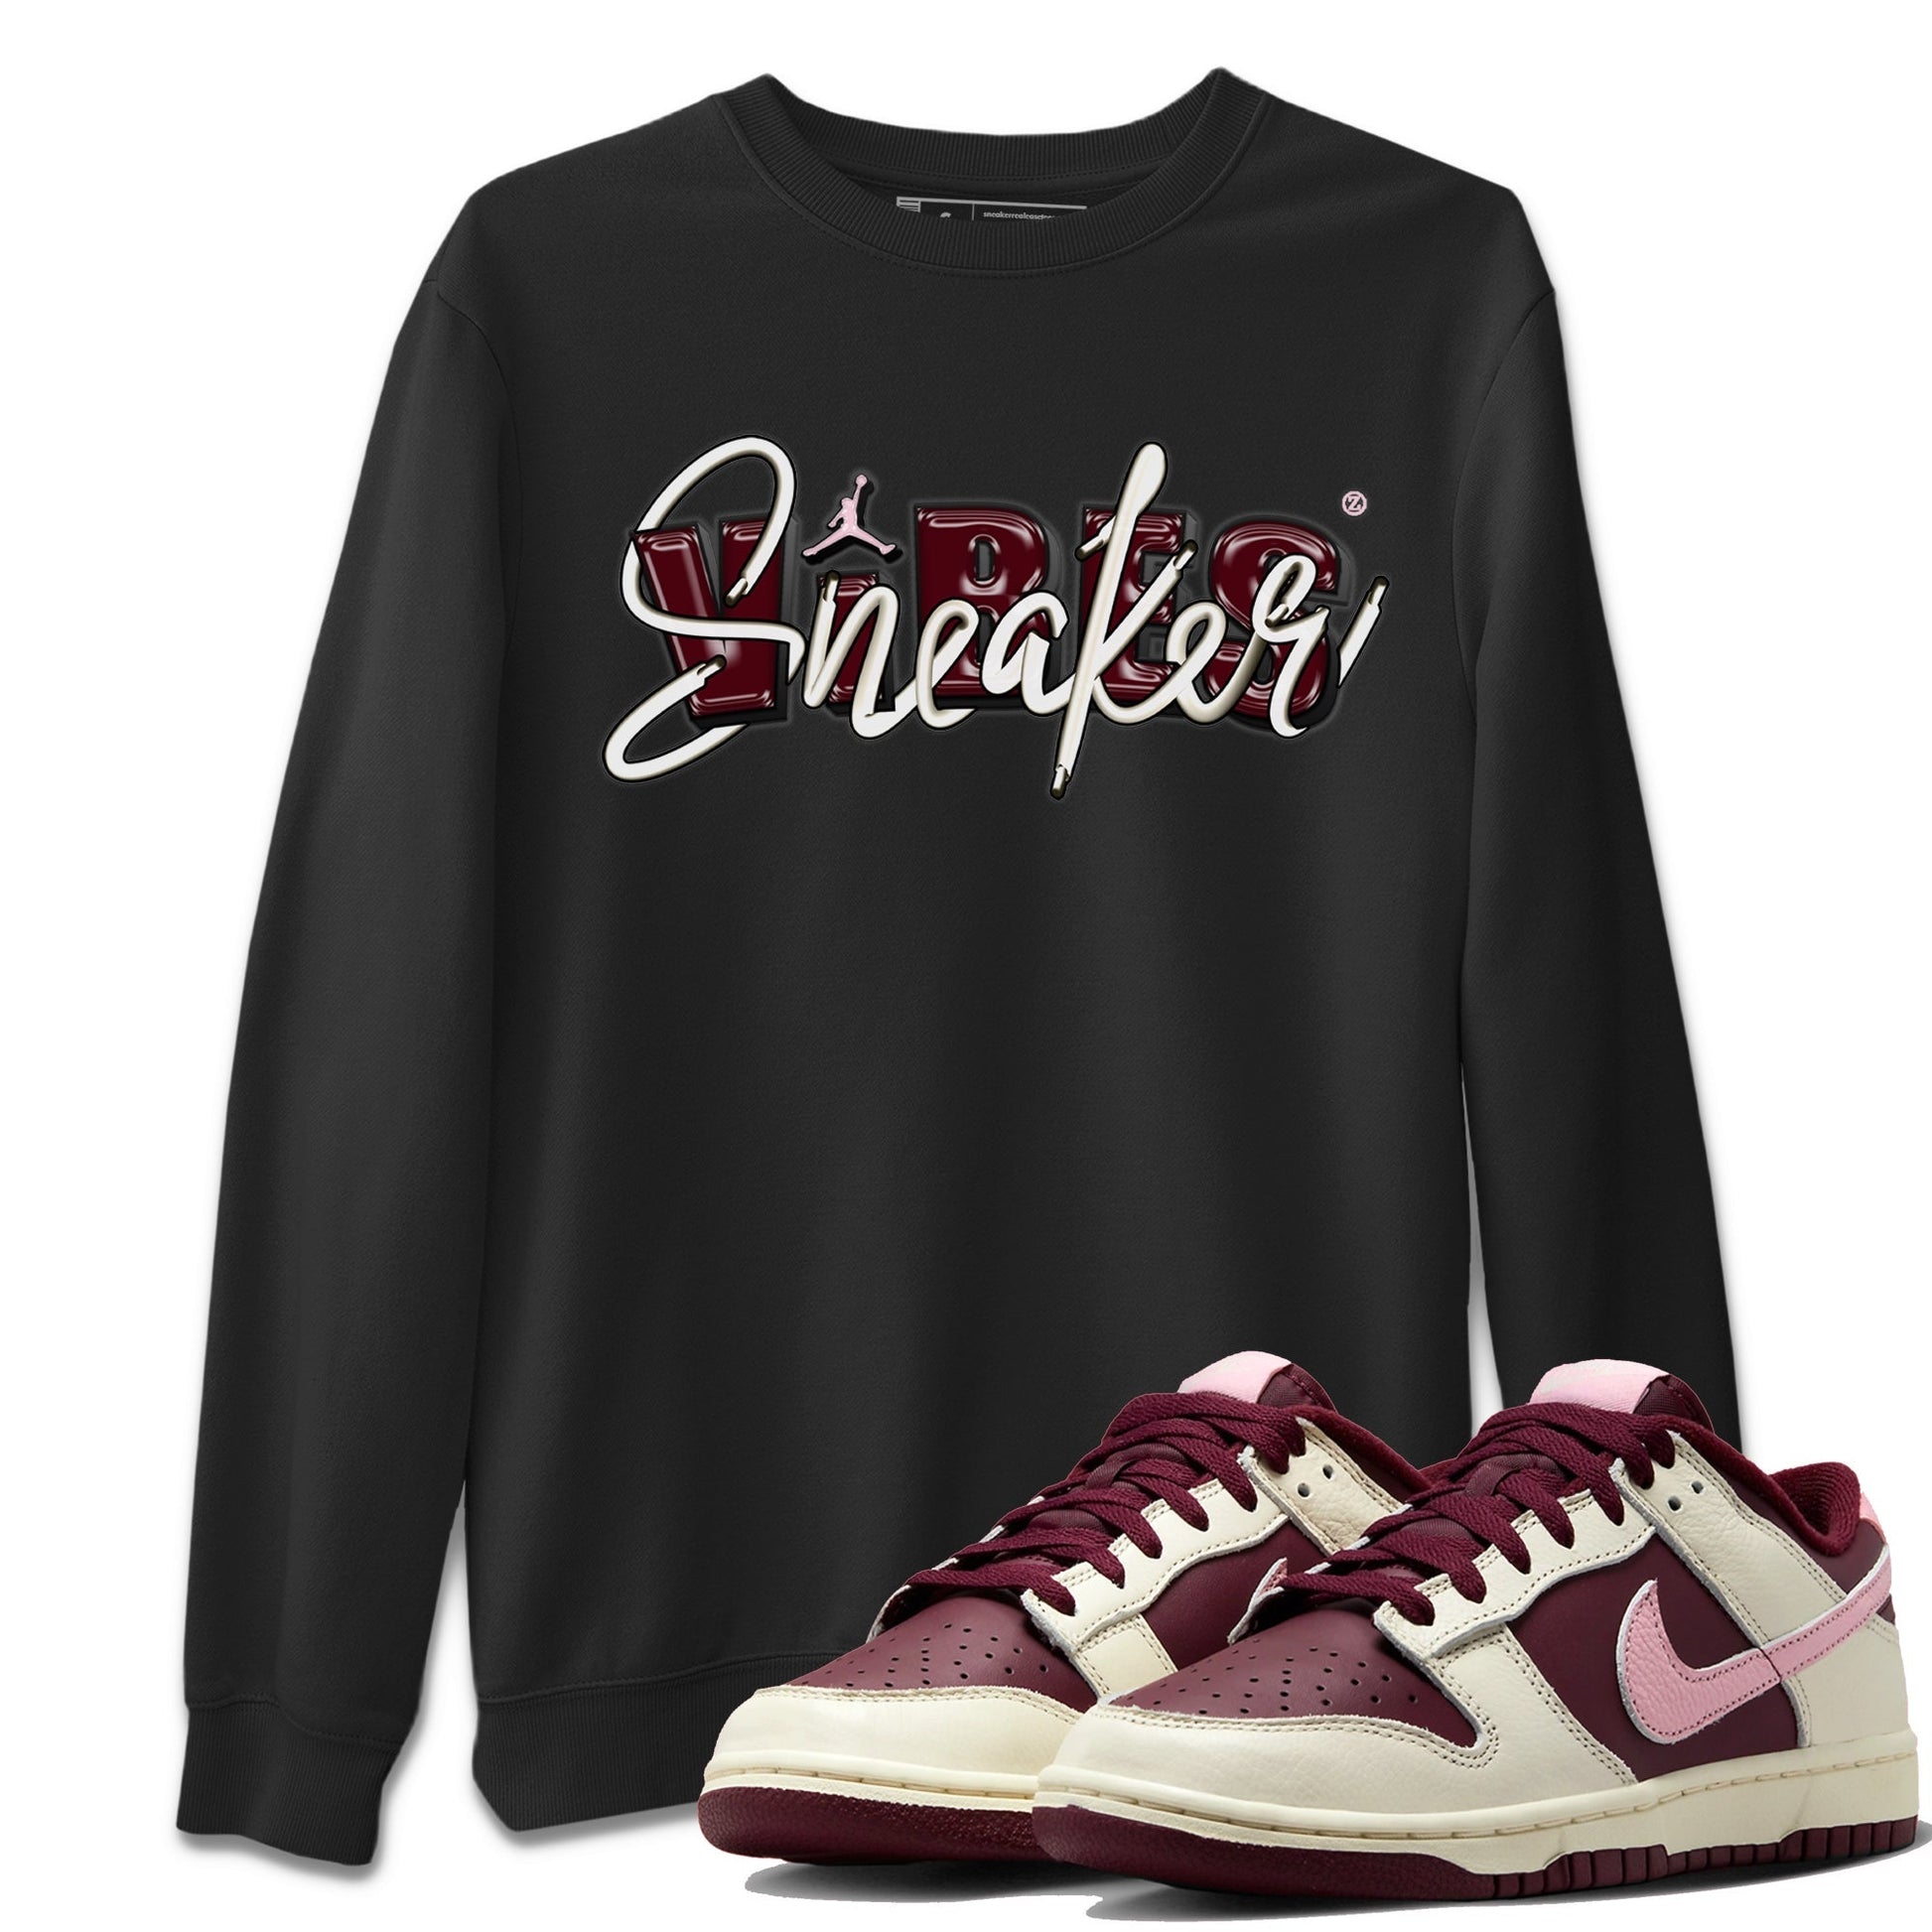 Dunk Valentines Day Sneaker Match Tees Sneaker Vibes Sneaker Tees Nike Dunk Valentine's Day Sneaker SNRT Sneaker Tees Unisex Shirts